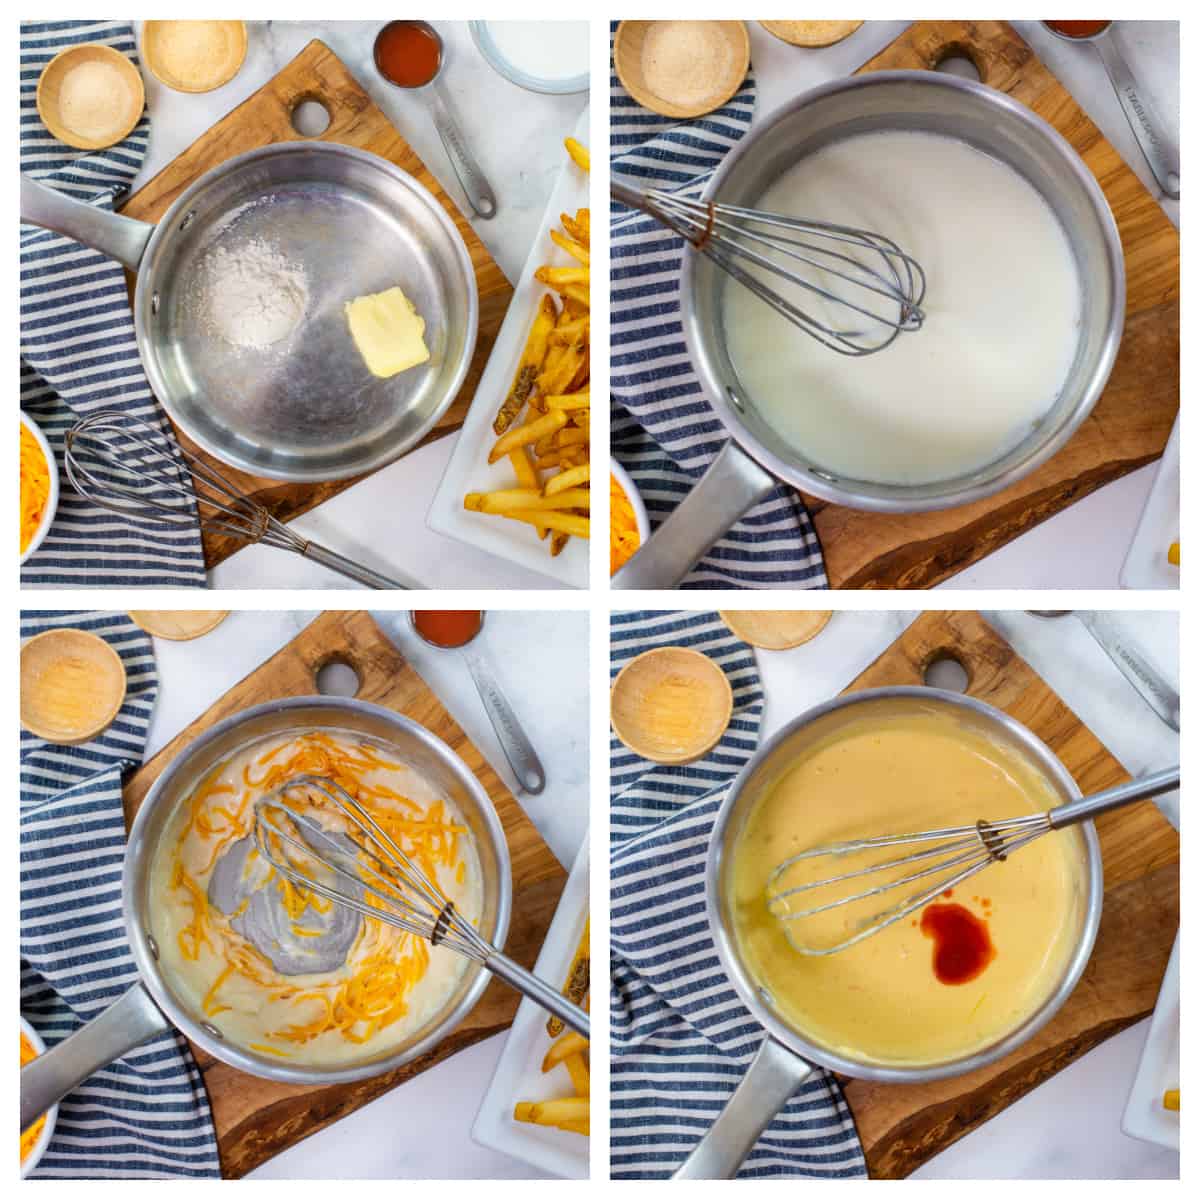 Collage showing how to make cheese sauce recipe.